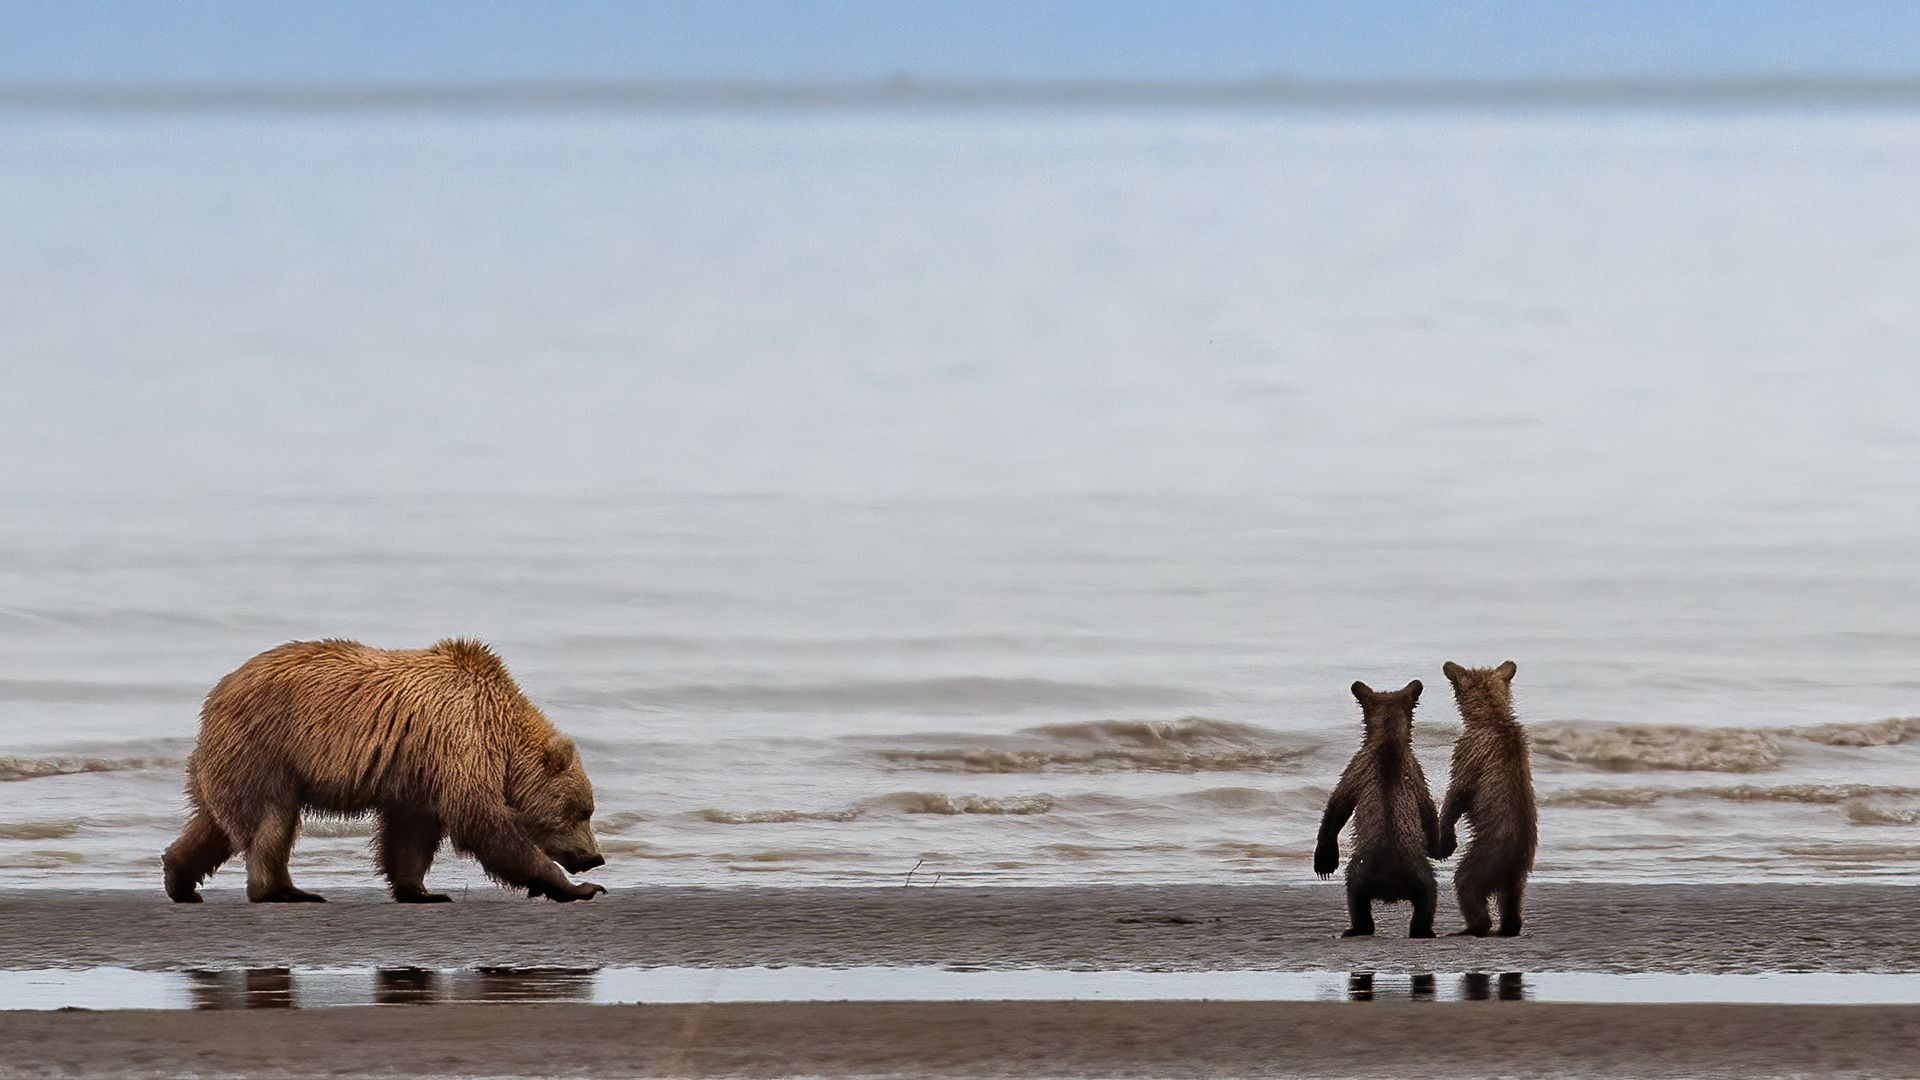 Two grizzly bear cubs appear gazing out onto the vast inlet as their mother hunts for clams buried on the sandy beach in Alaska.